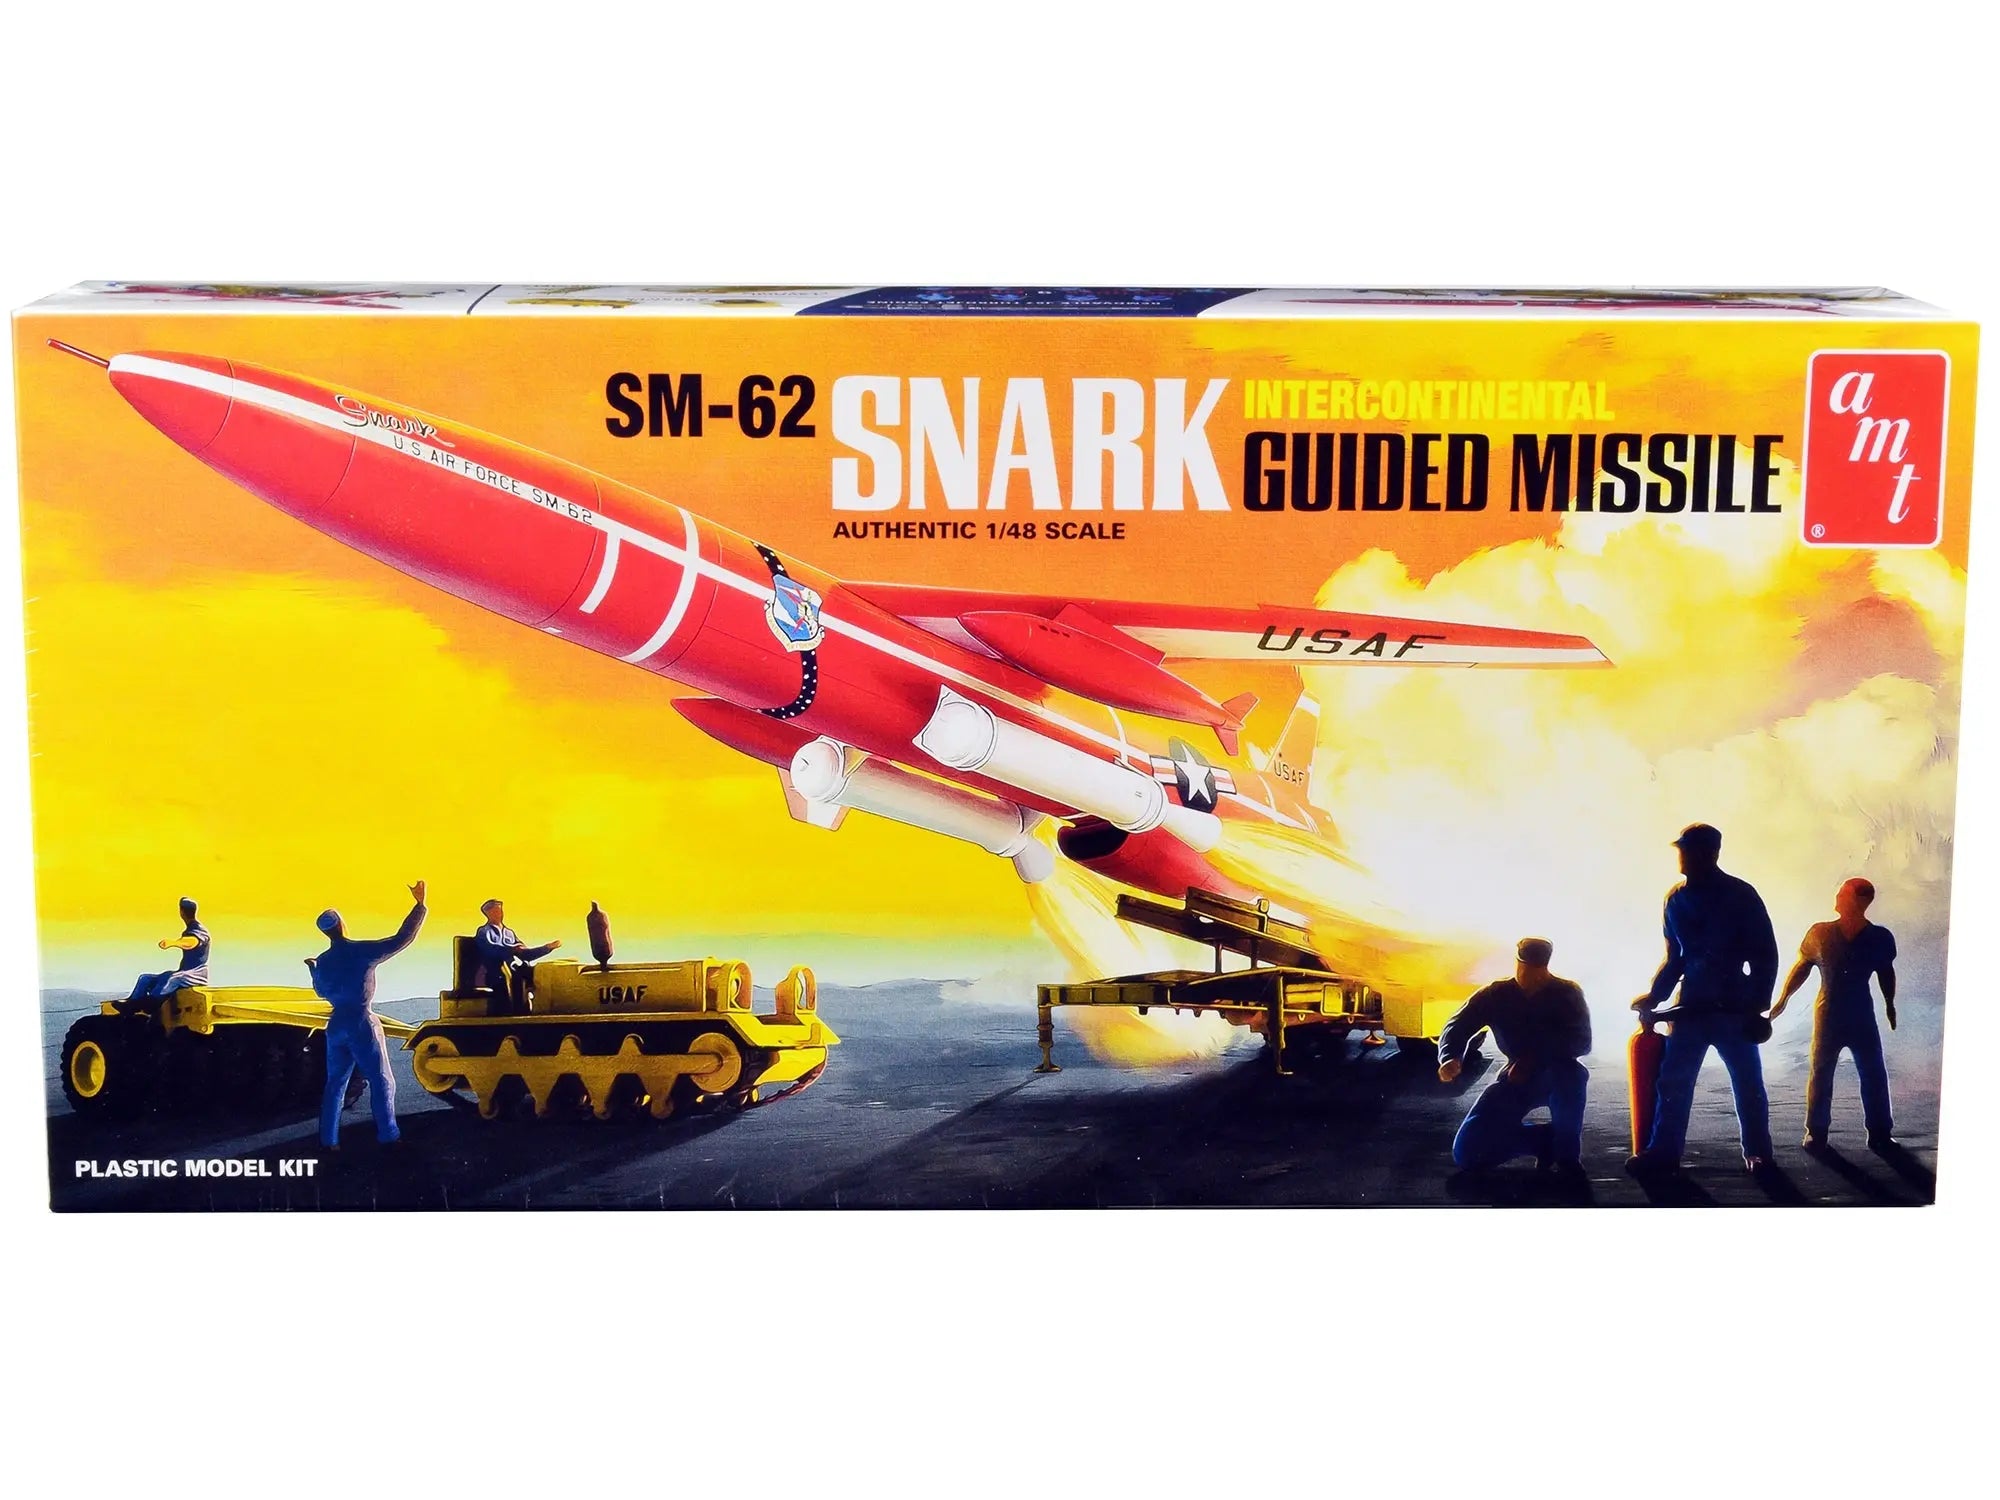 Skill 2 Model Kit Northrop SM-62 Snark Intercontinental Guided Missile 1/48 Scale Model by AMT AMT